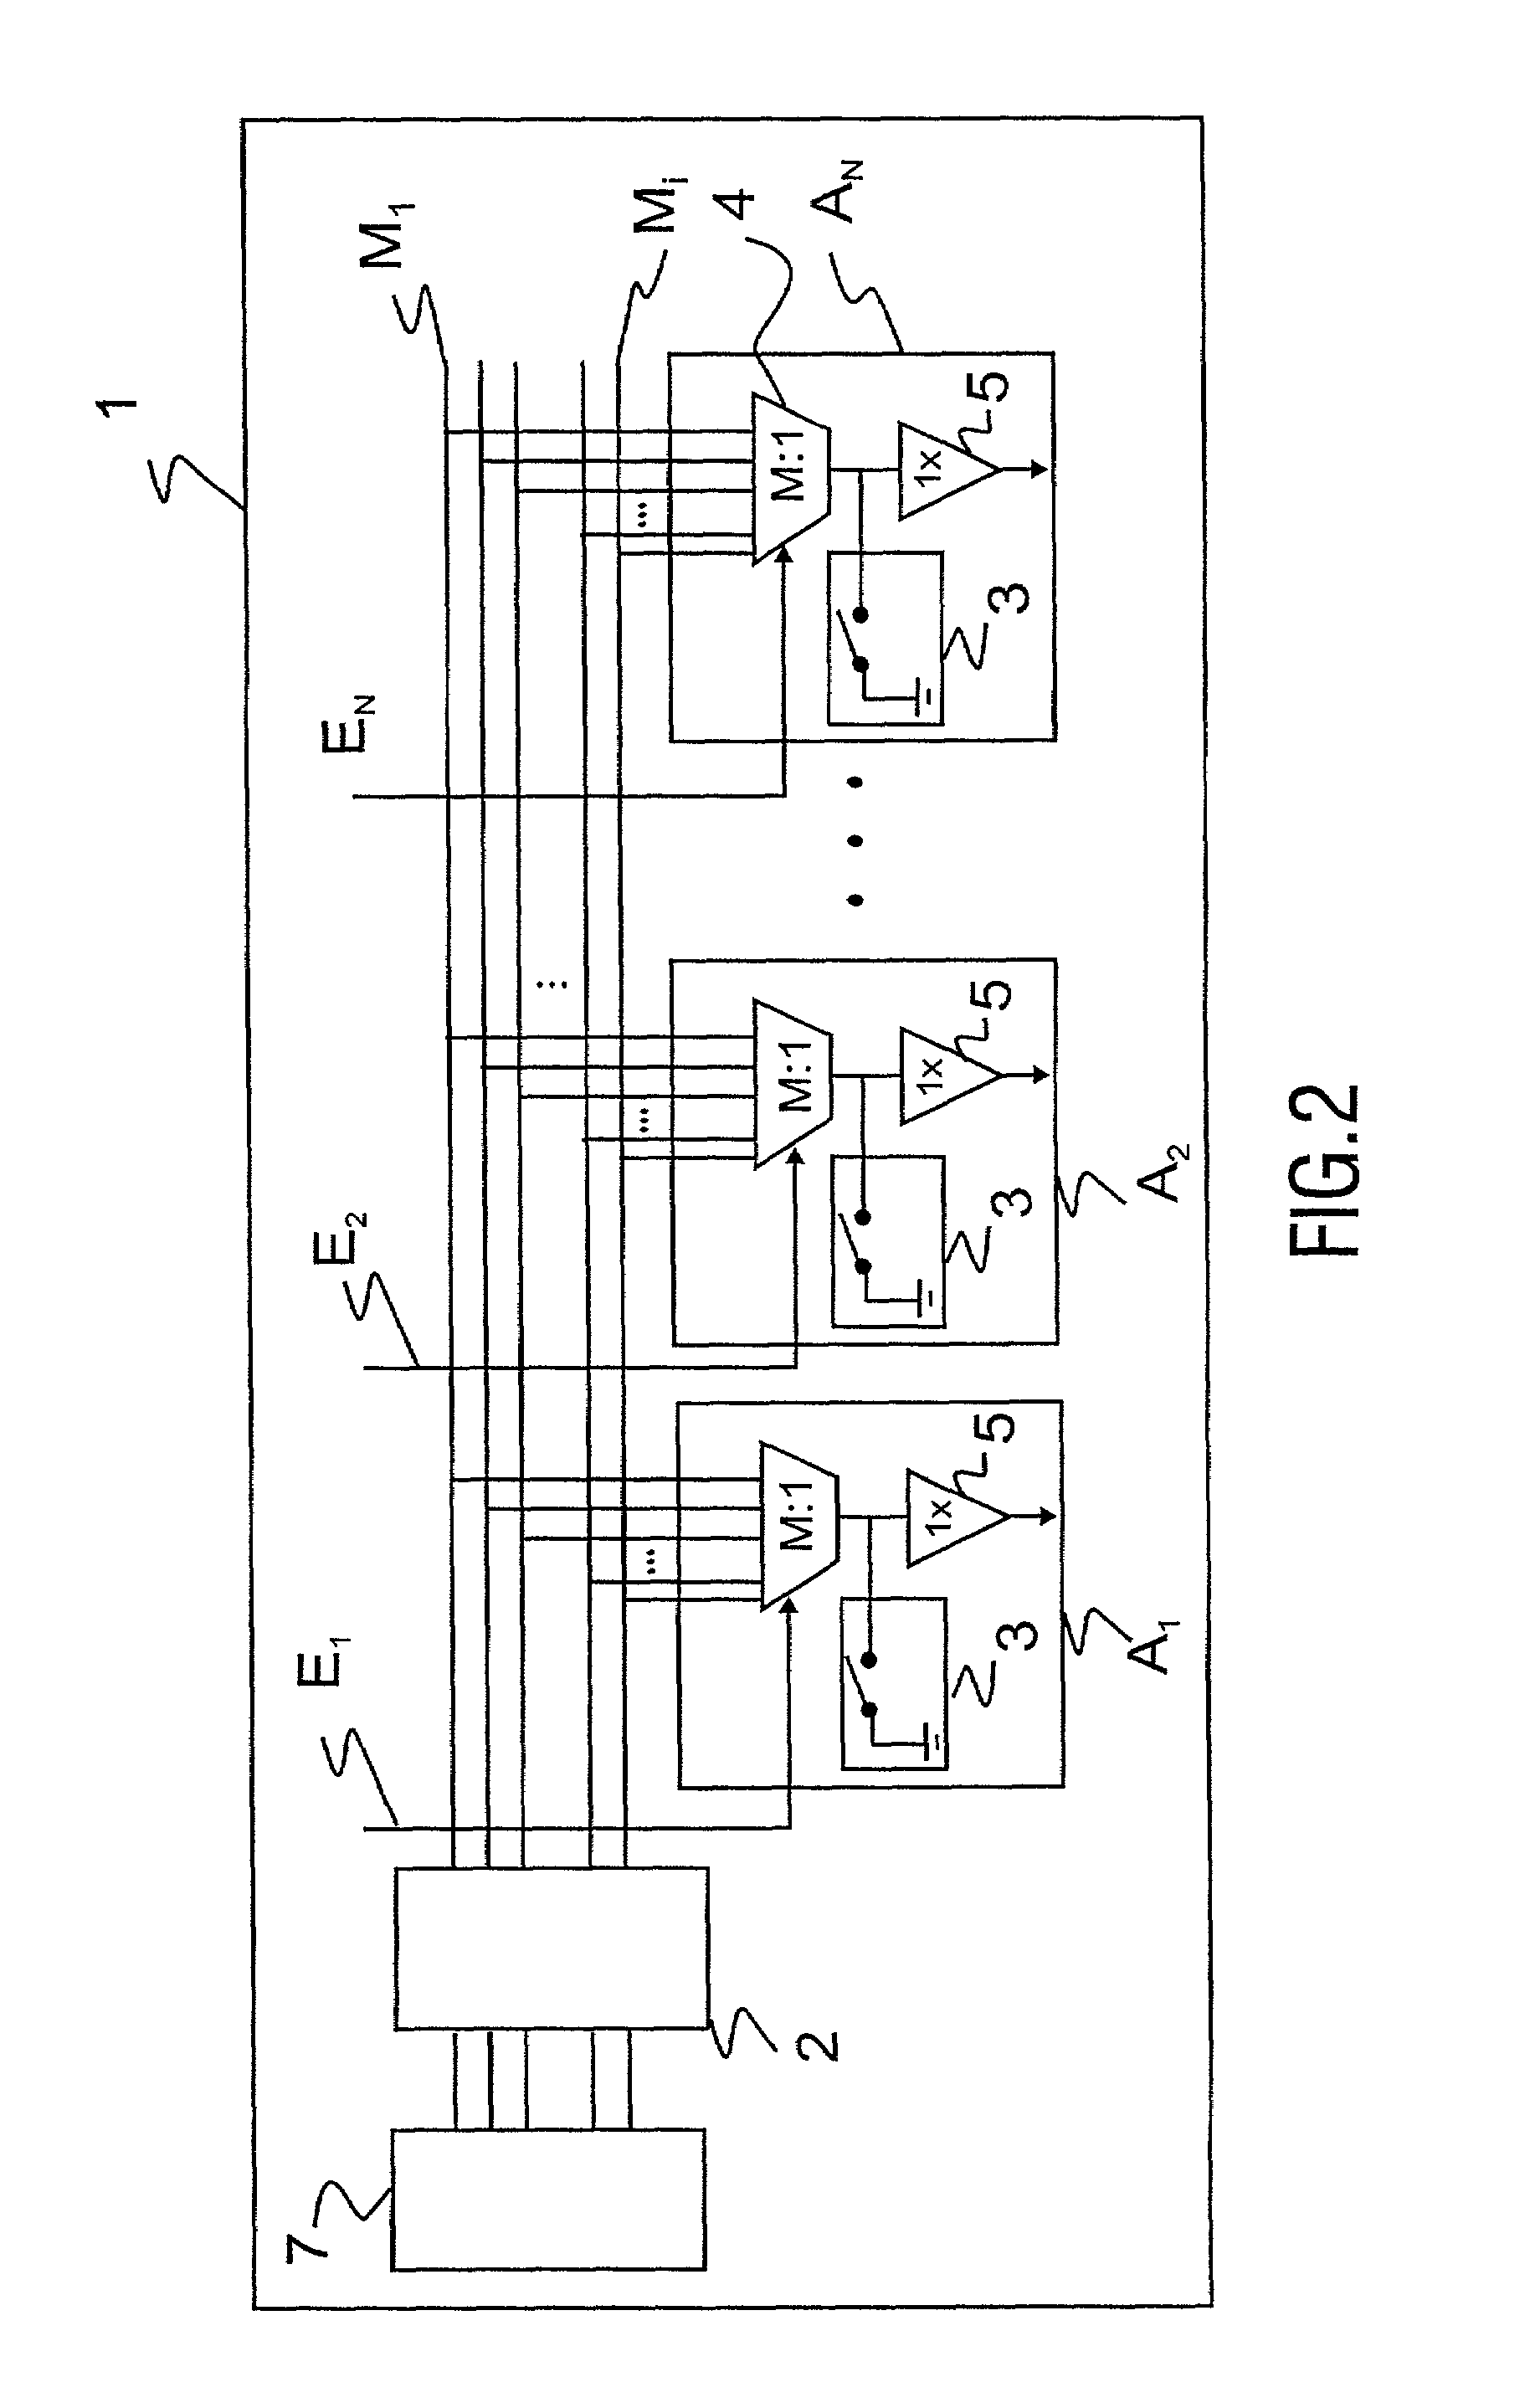 Driver circuit for a display device